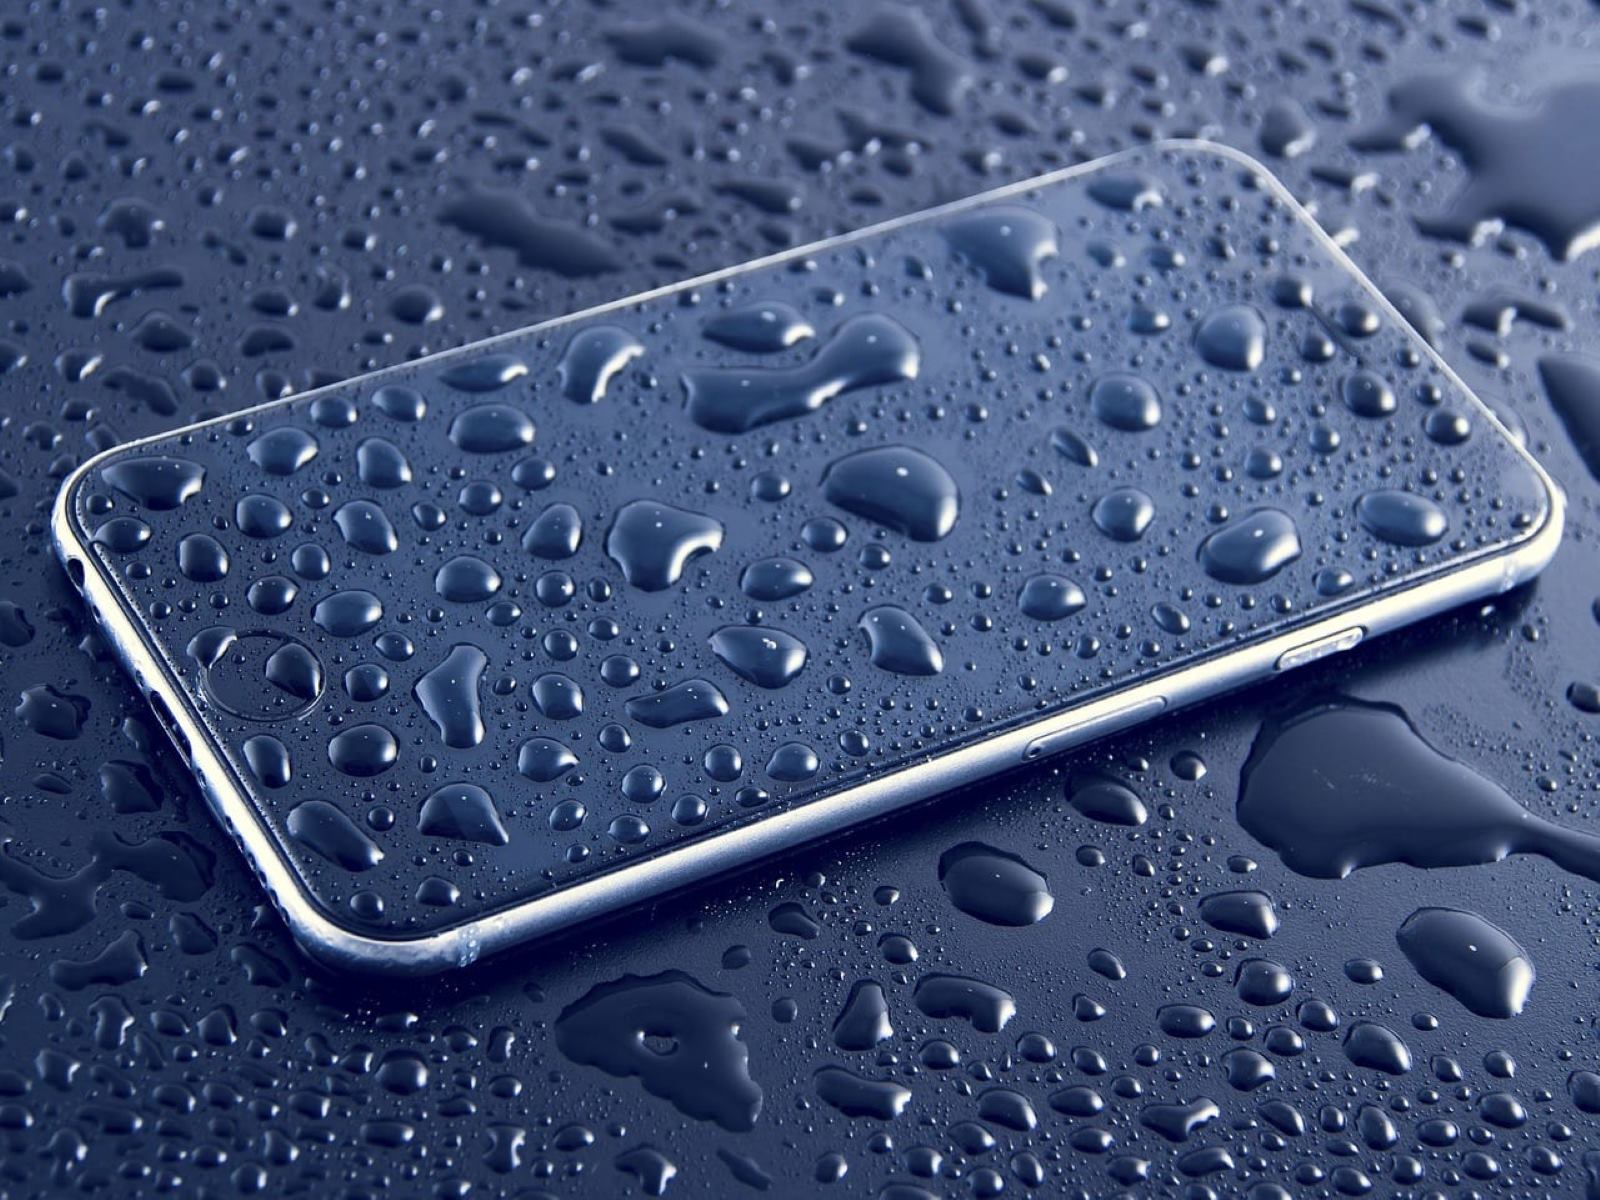 Enhancing Waterproofing Without A Case: Phone Hacks